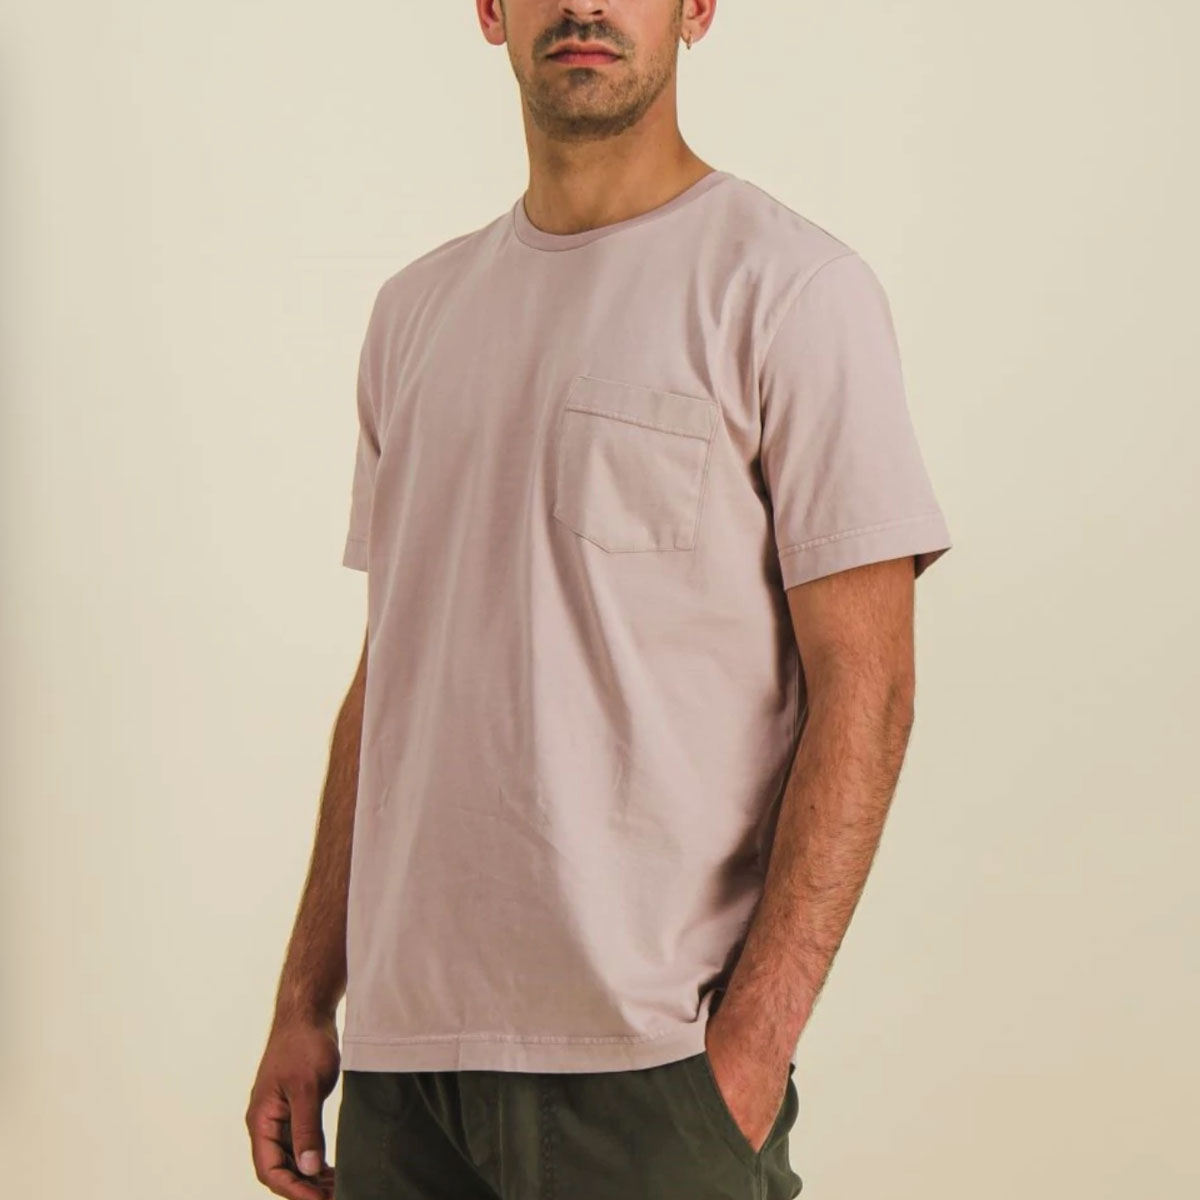 OUTLAND Tee shirt WELCOME Rose pale